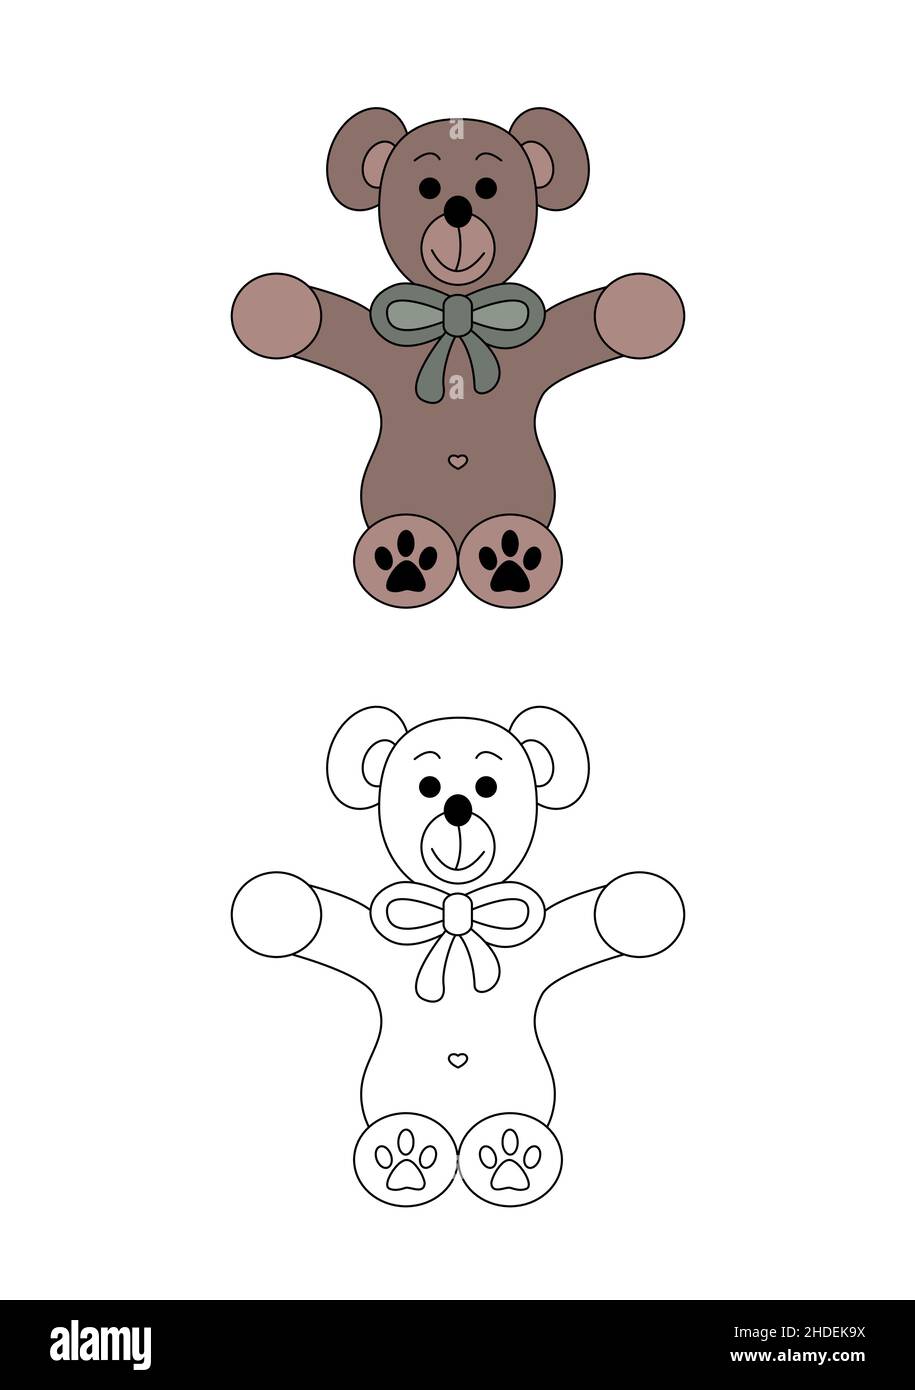 Cute teddy bear with his bow tie. Coloring page for kids. Vector illustration. Stock Vector